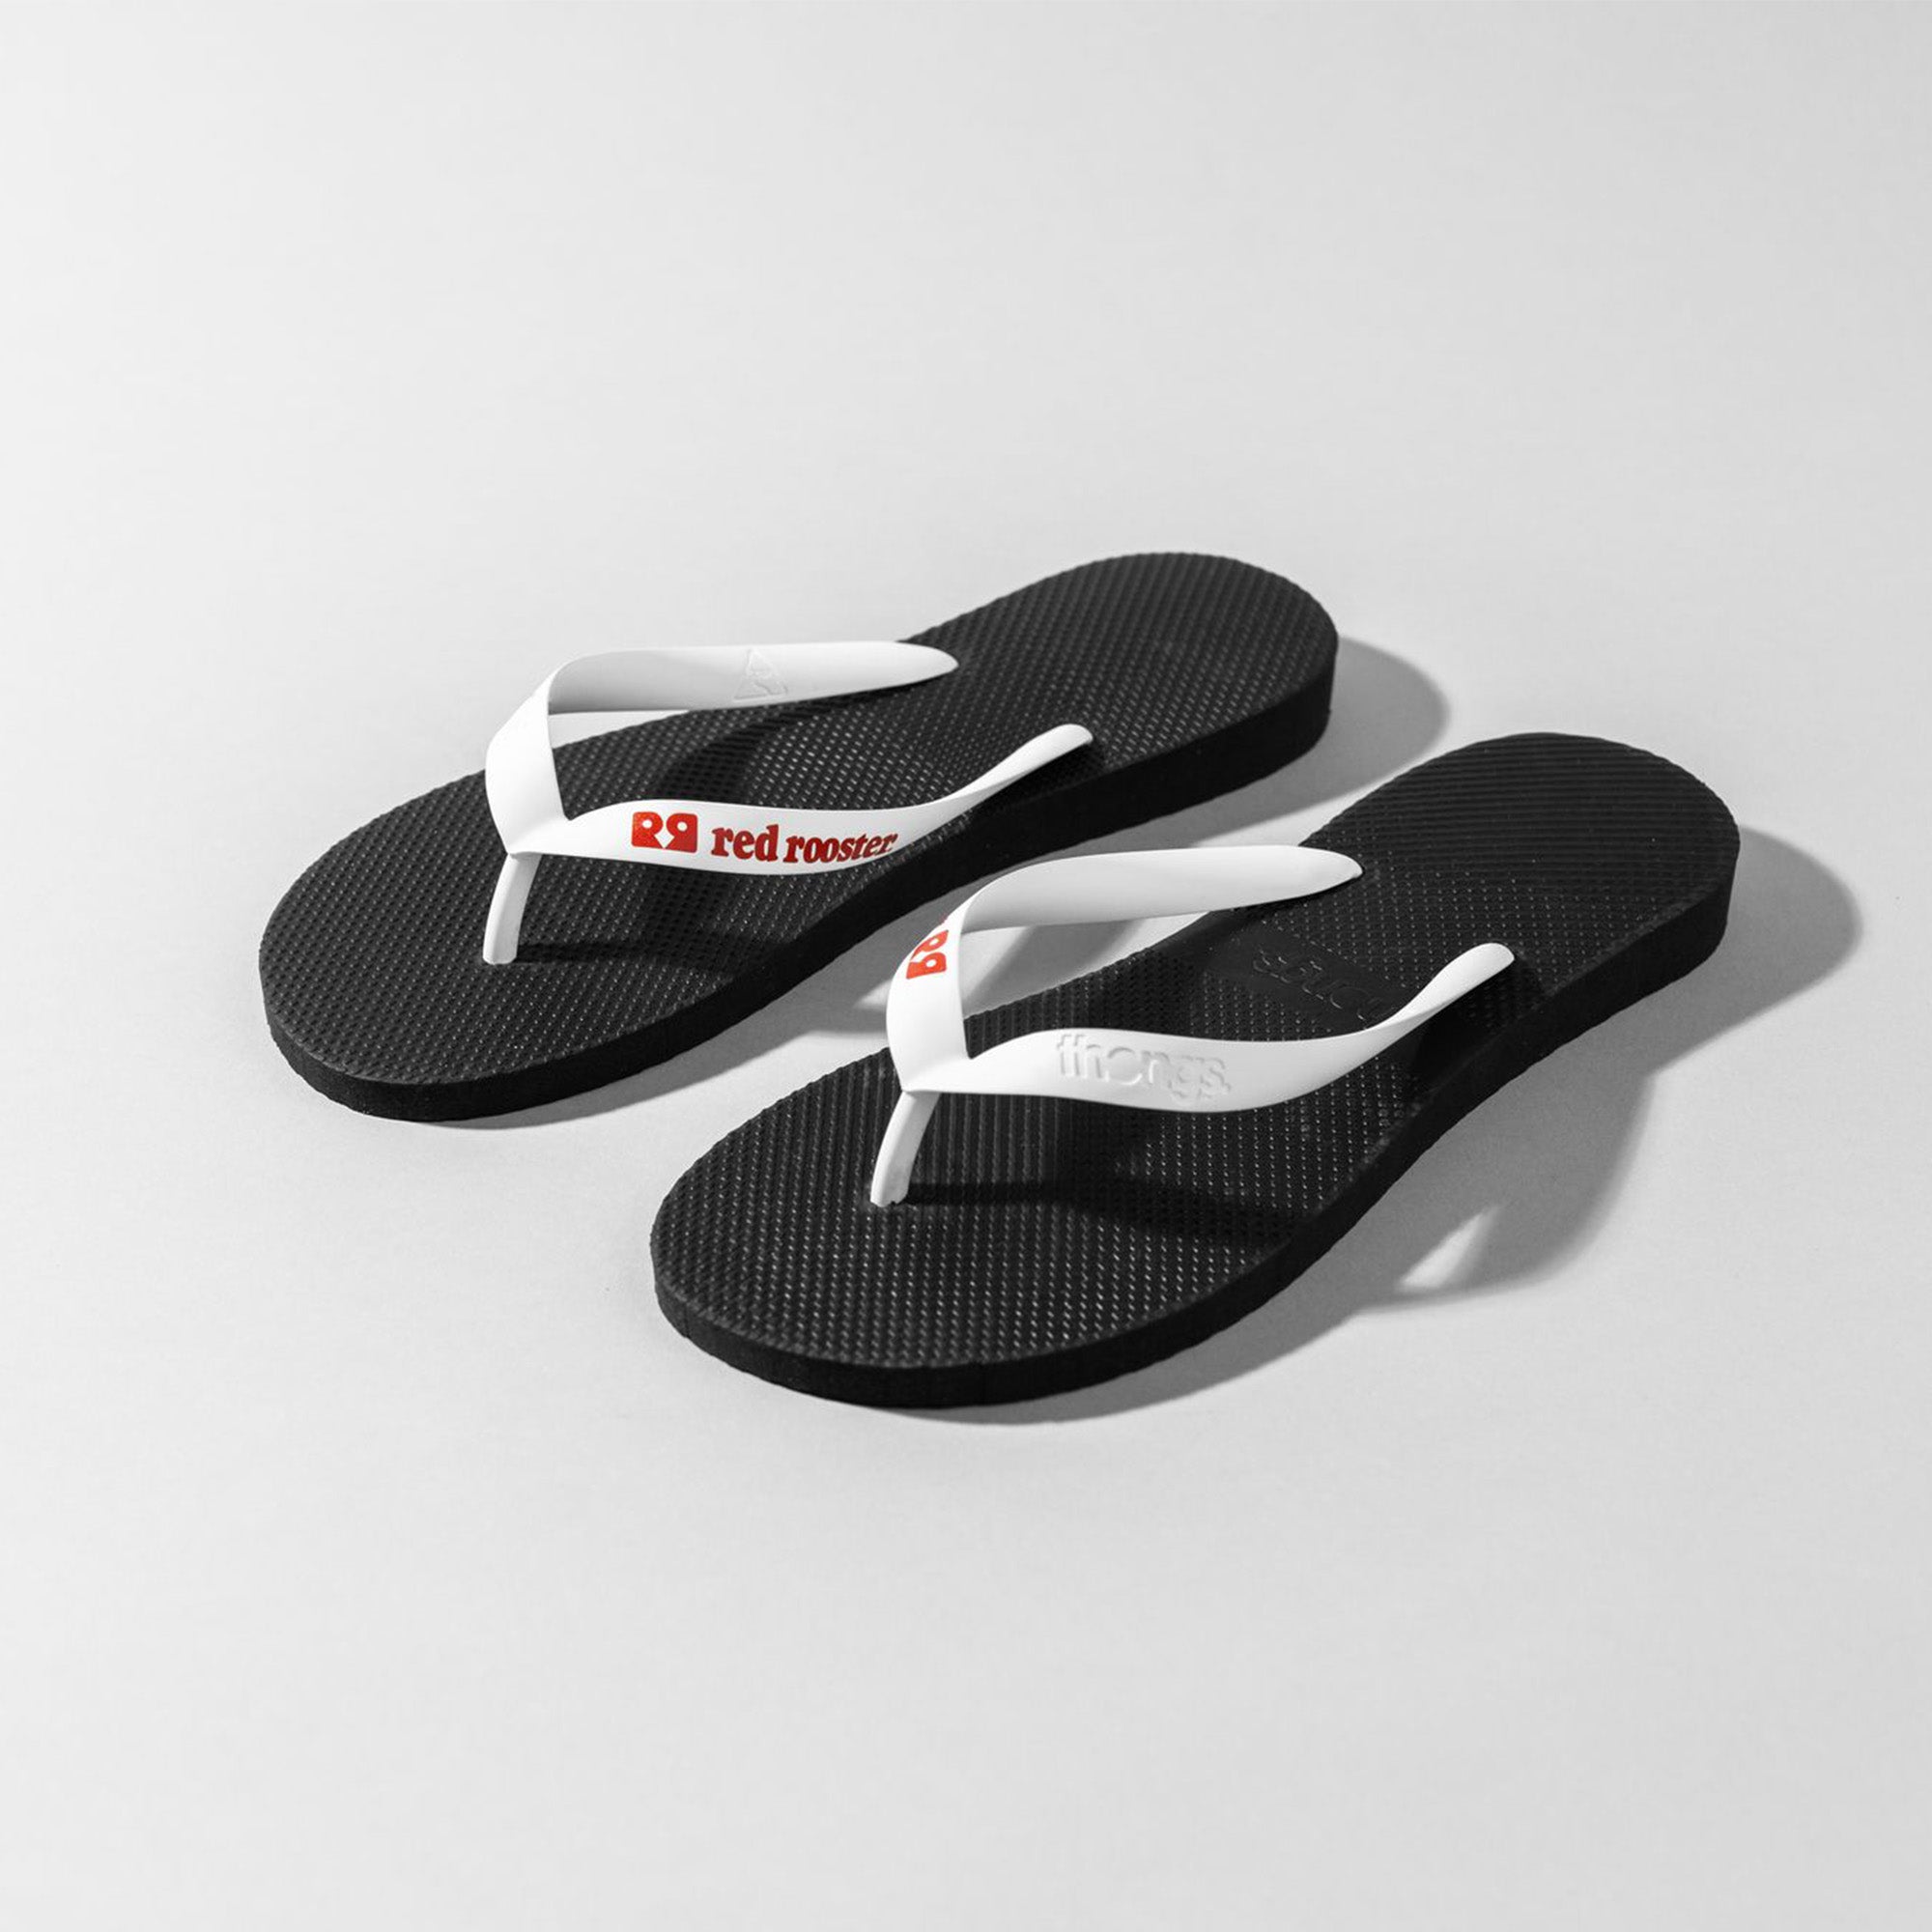 Red Rooster X Thongs Australia Limited Edition Thongs